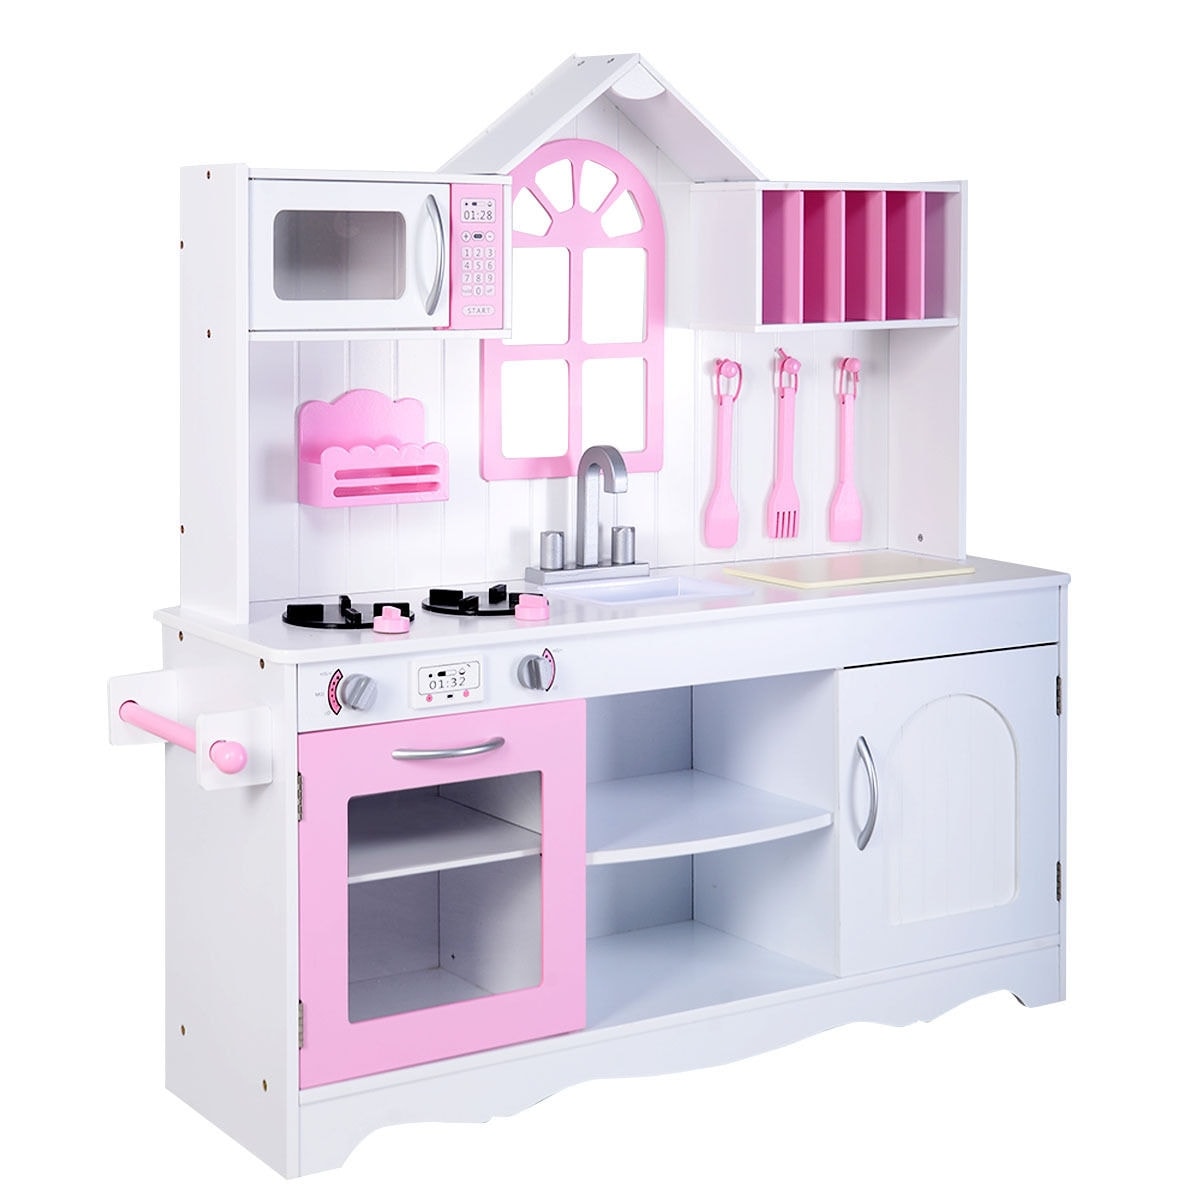 pretend play sets for toddlers